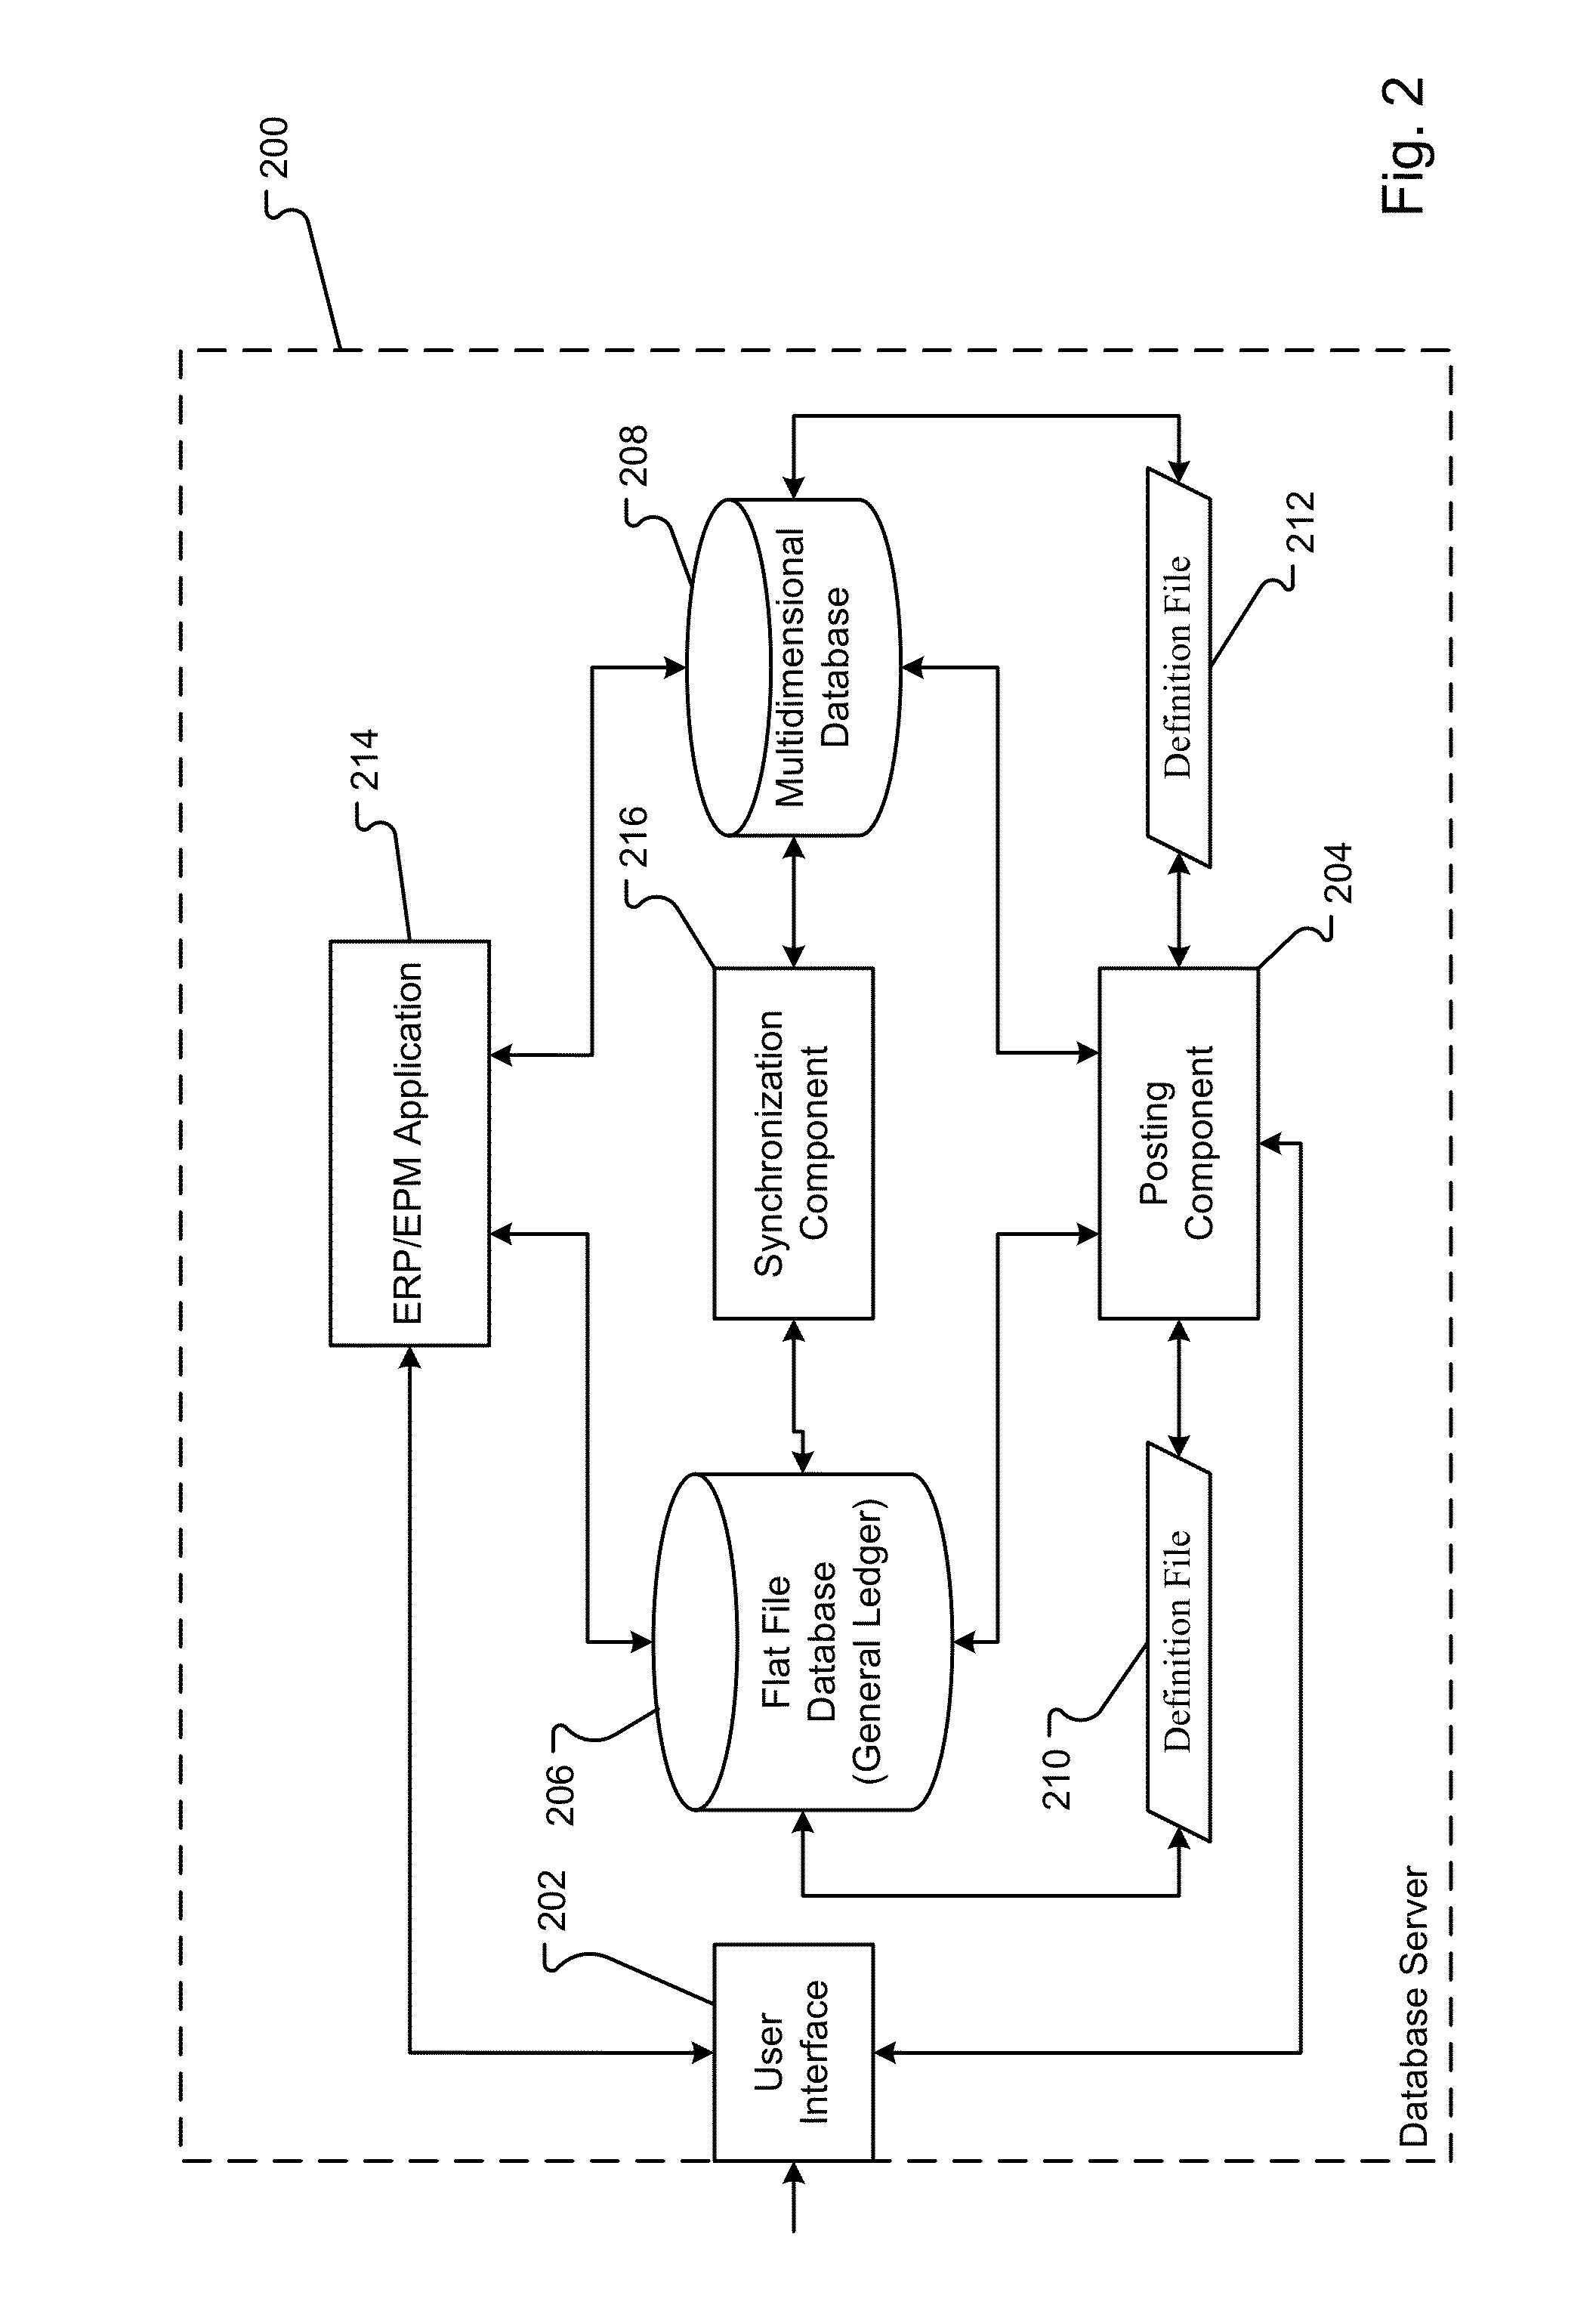 Mechanism for synchronizing OLAP system structure and OLTP system structure